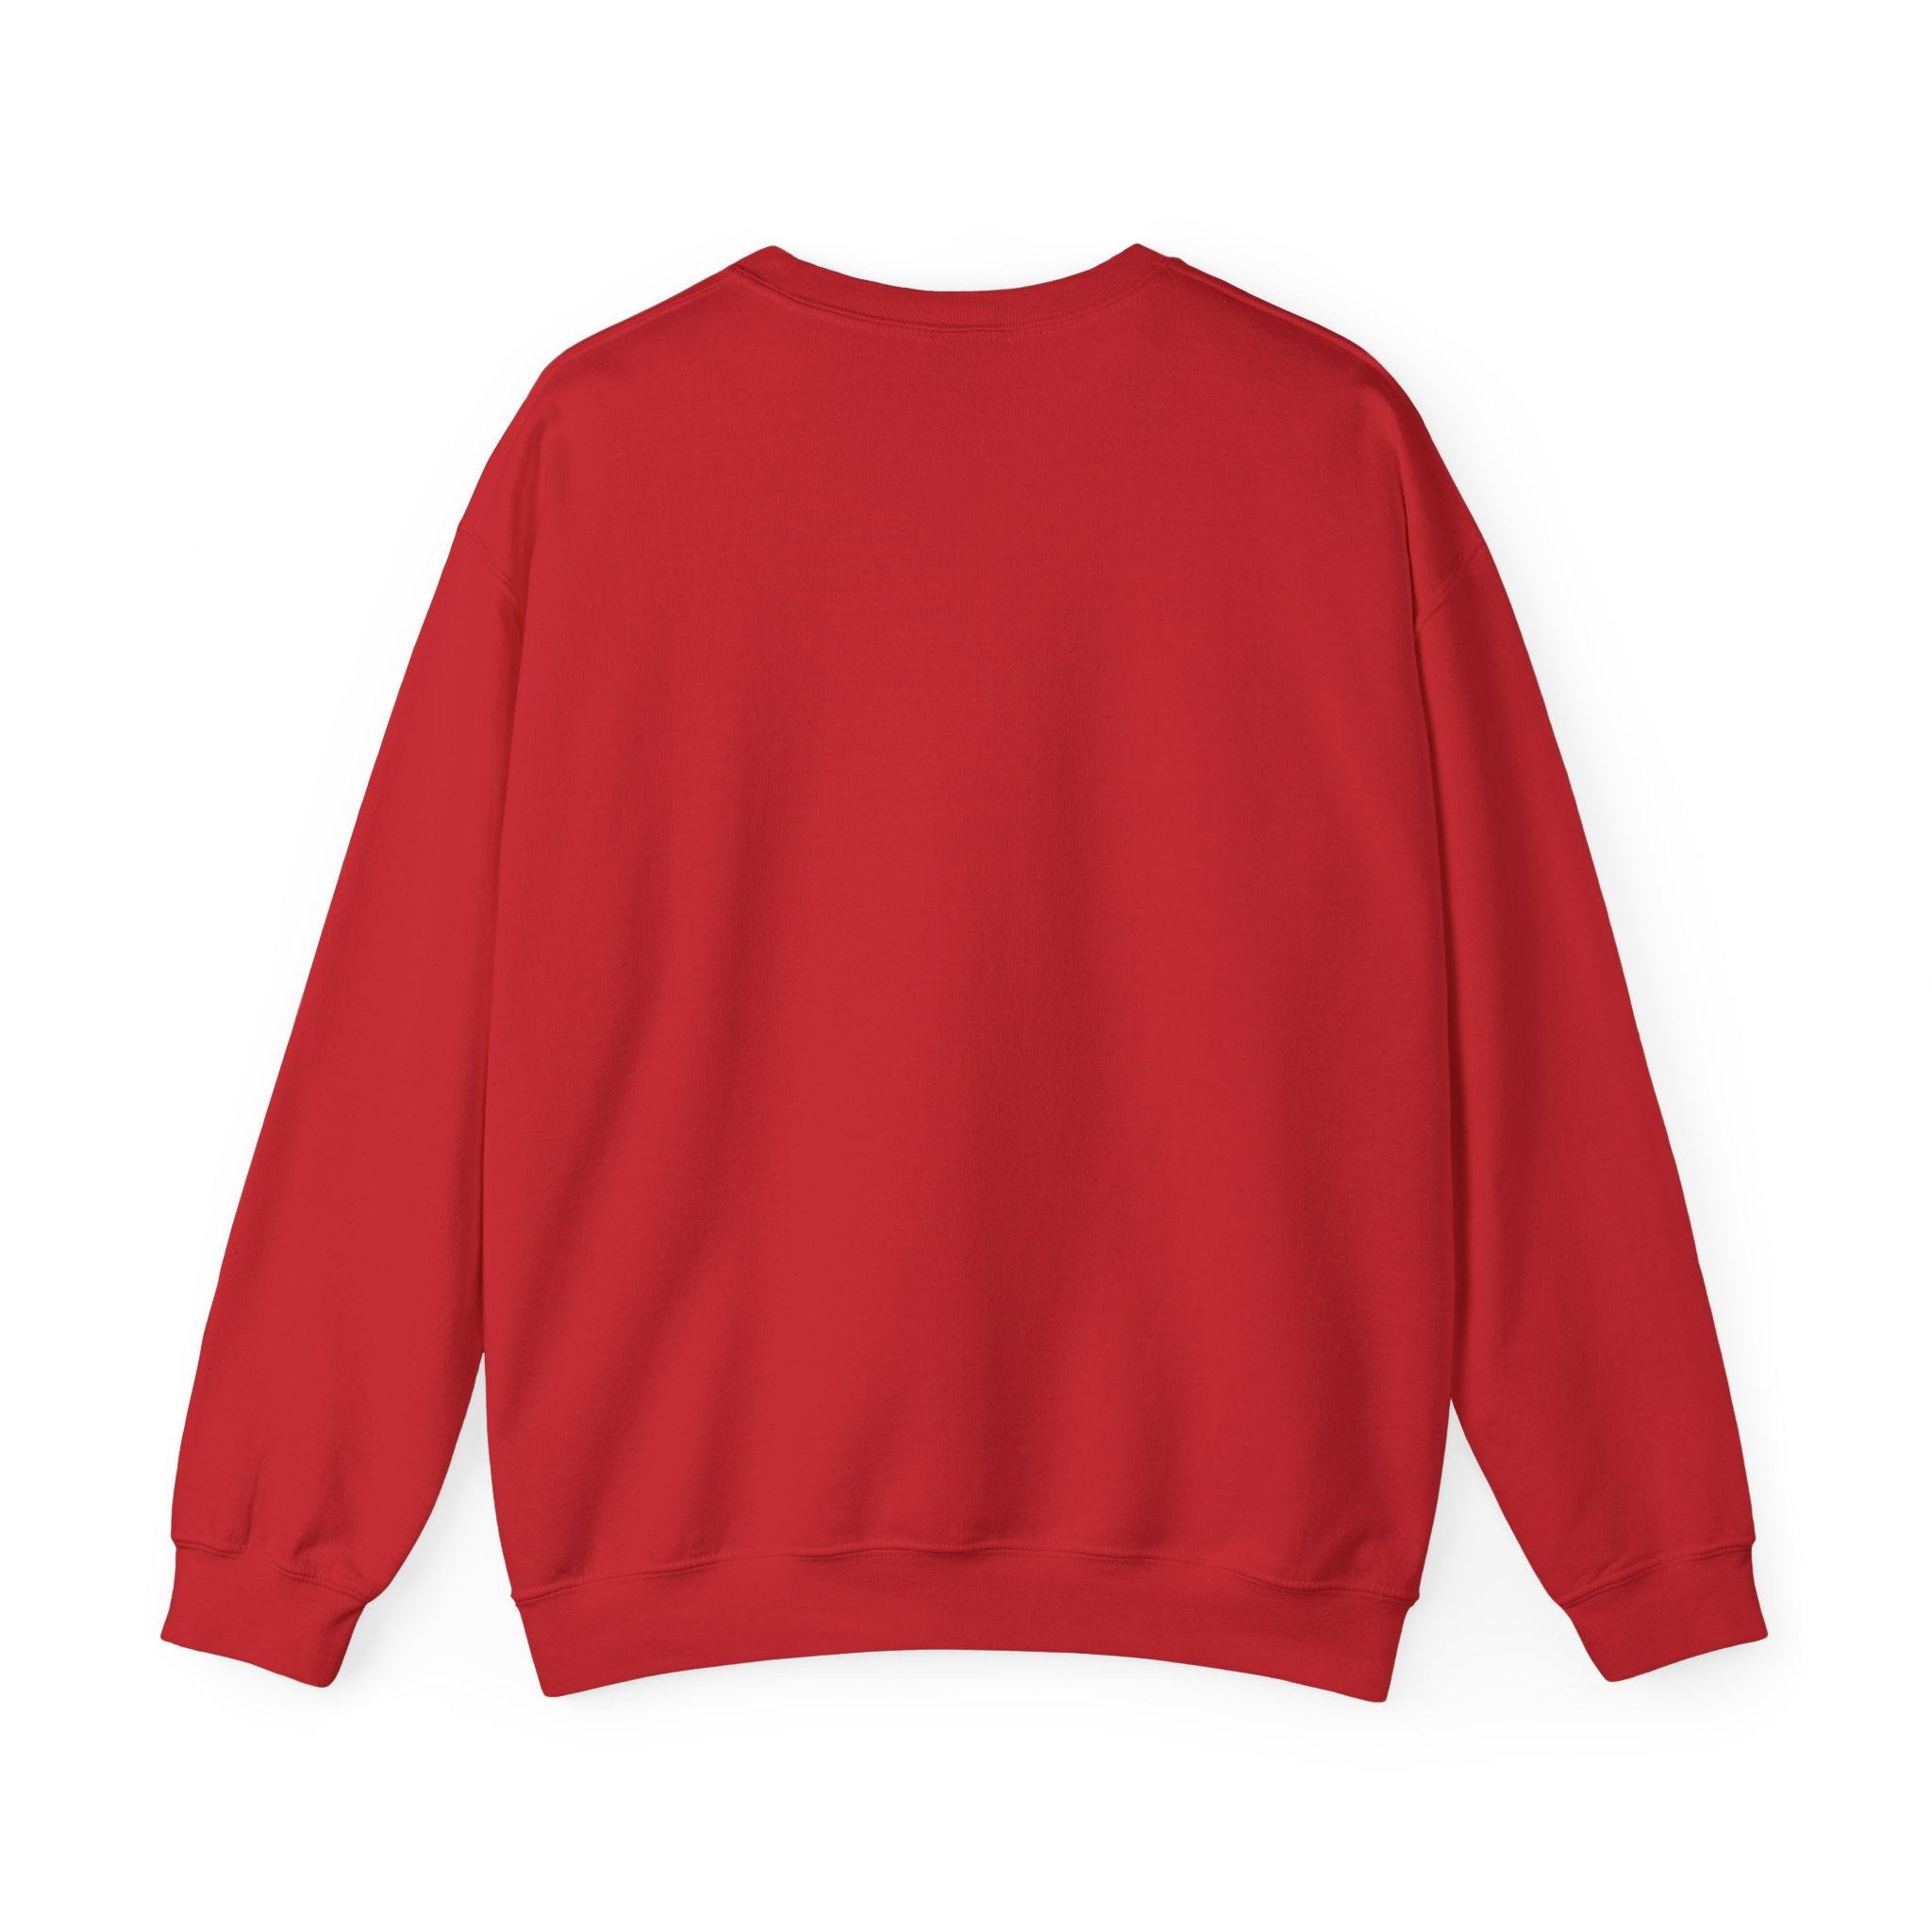 A cozy red RG-B - Sweatshirt shown from the back, displayed against a plain white background.